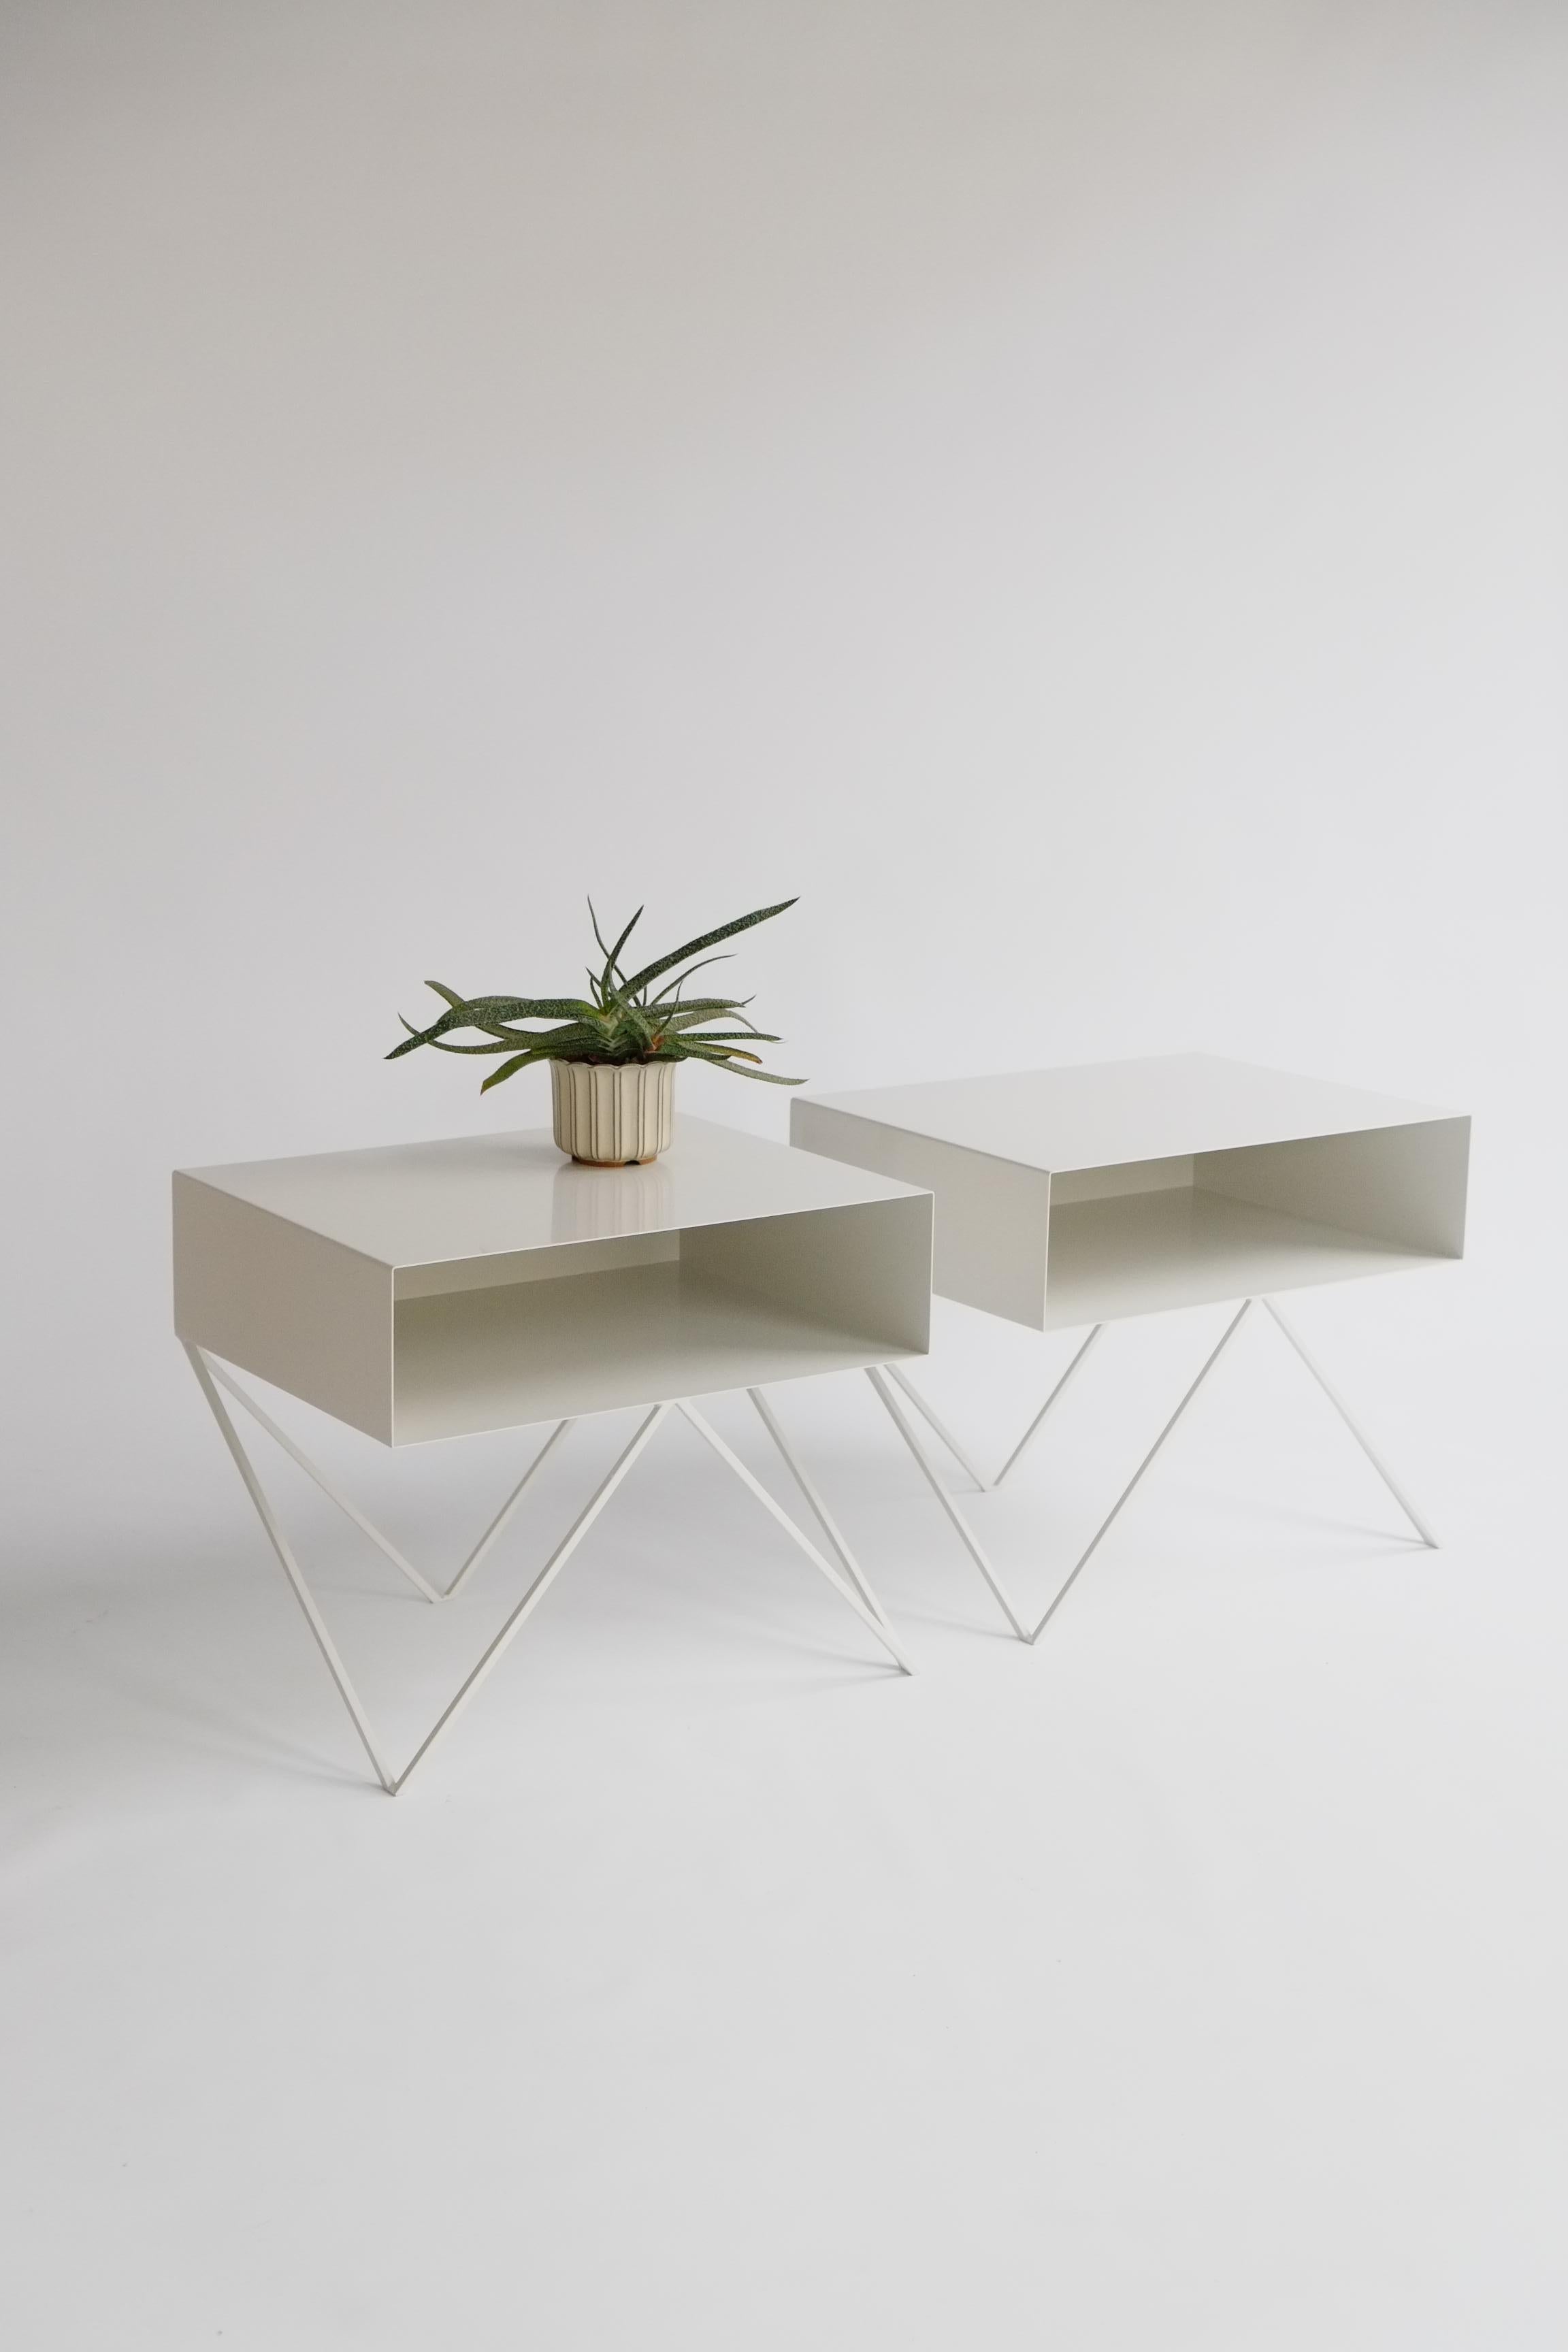 A bespoke pair (size customisable) of elegant paper white powder-coated steel Robot bedside tables. The Robot side table features an open shelf on zig zag legs. A wide, low elegant design made of solid steel, powder coated in paper white. The clean